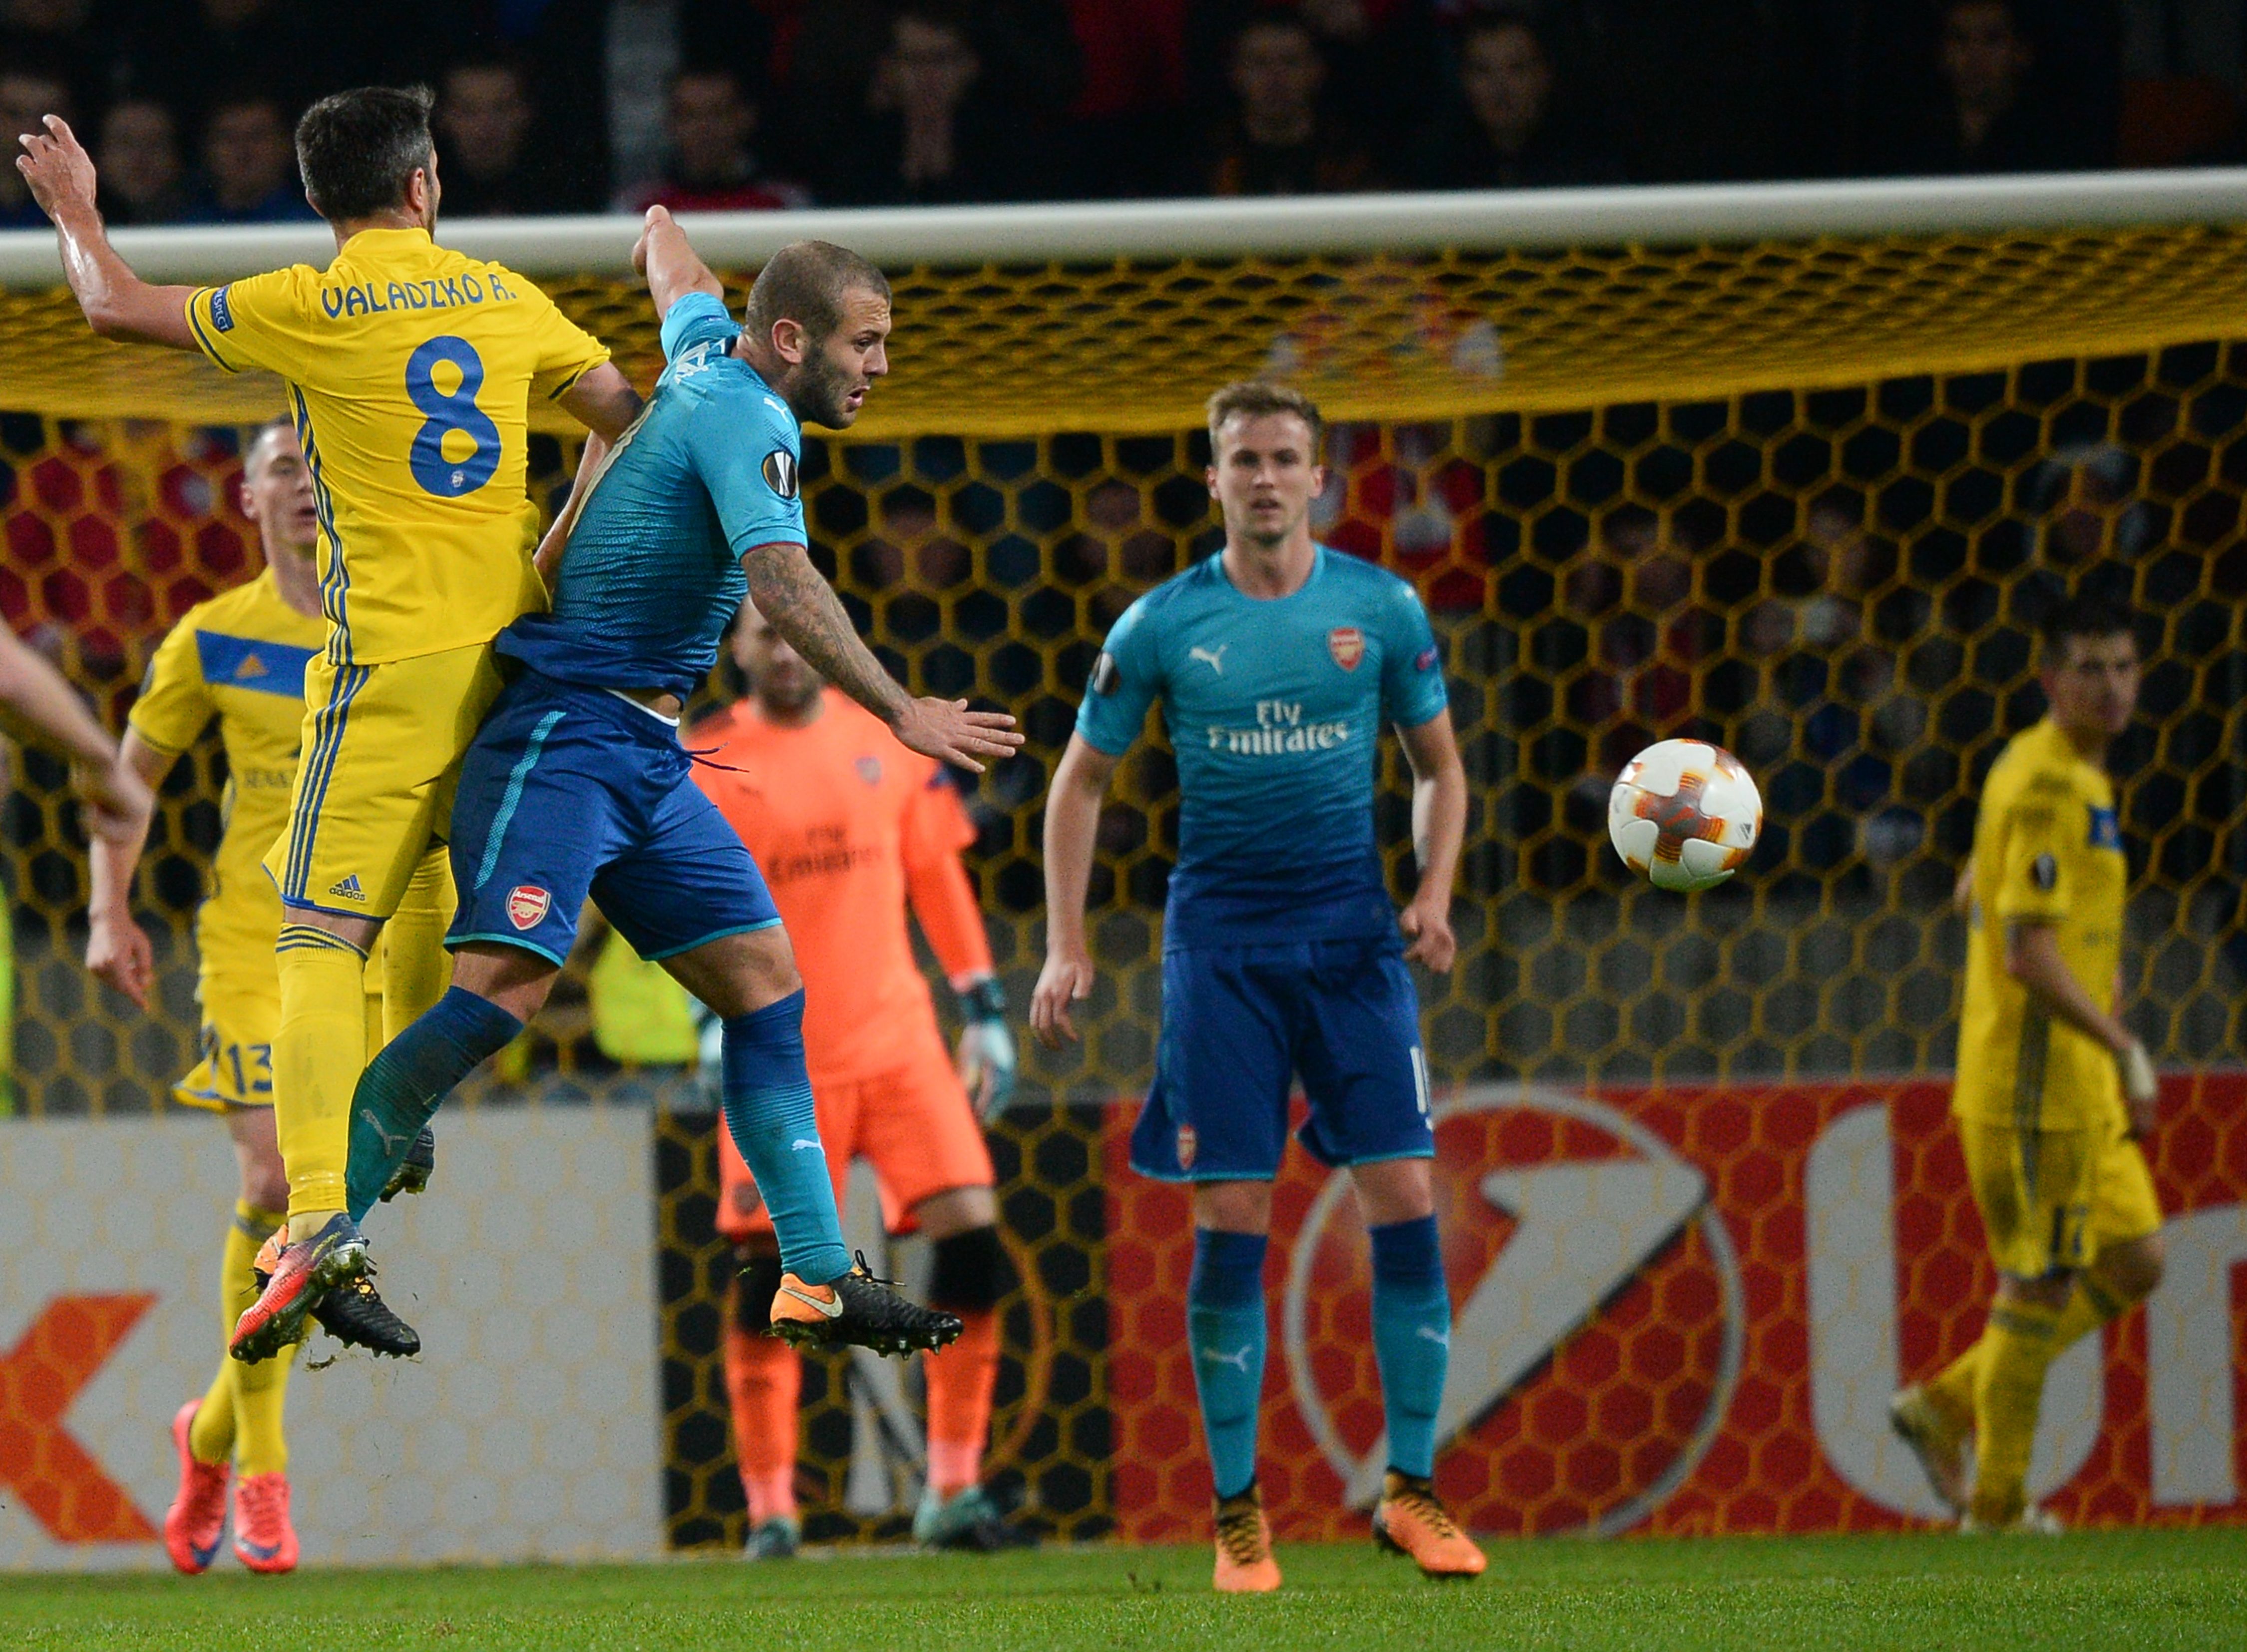 BATE Borisov's midfielder from Belarus Aliaksandr Valadzko and Arsenal's midfielder from England Jack Wilshere vie for the ball during the UEFA Europa League Group H football match between FC BATE Borisov and Arsenal FC in Borisov, outside Minsk, on September 28, 2017. / AFP PHOTO / Maxim MALINOVSKY        (Photo credit should read MAXIM MALINOVSKY/AFP/Getty Images)